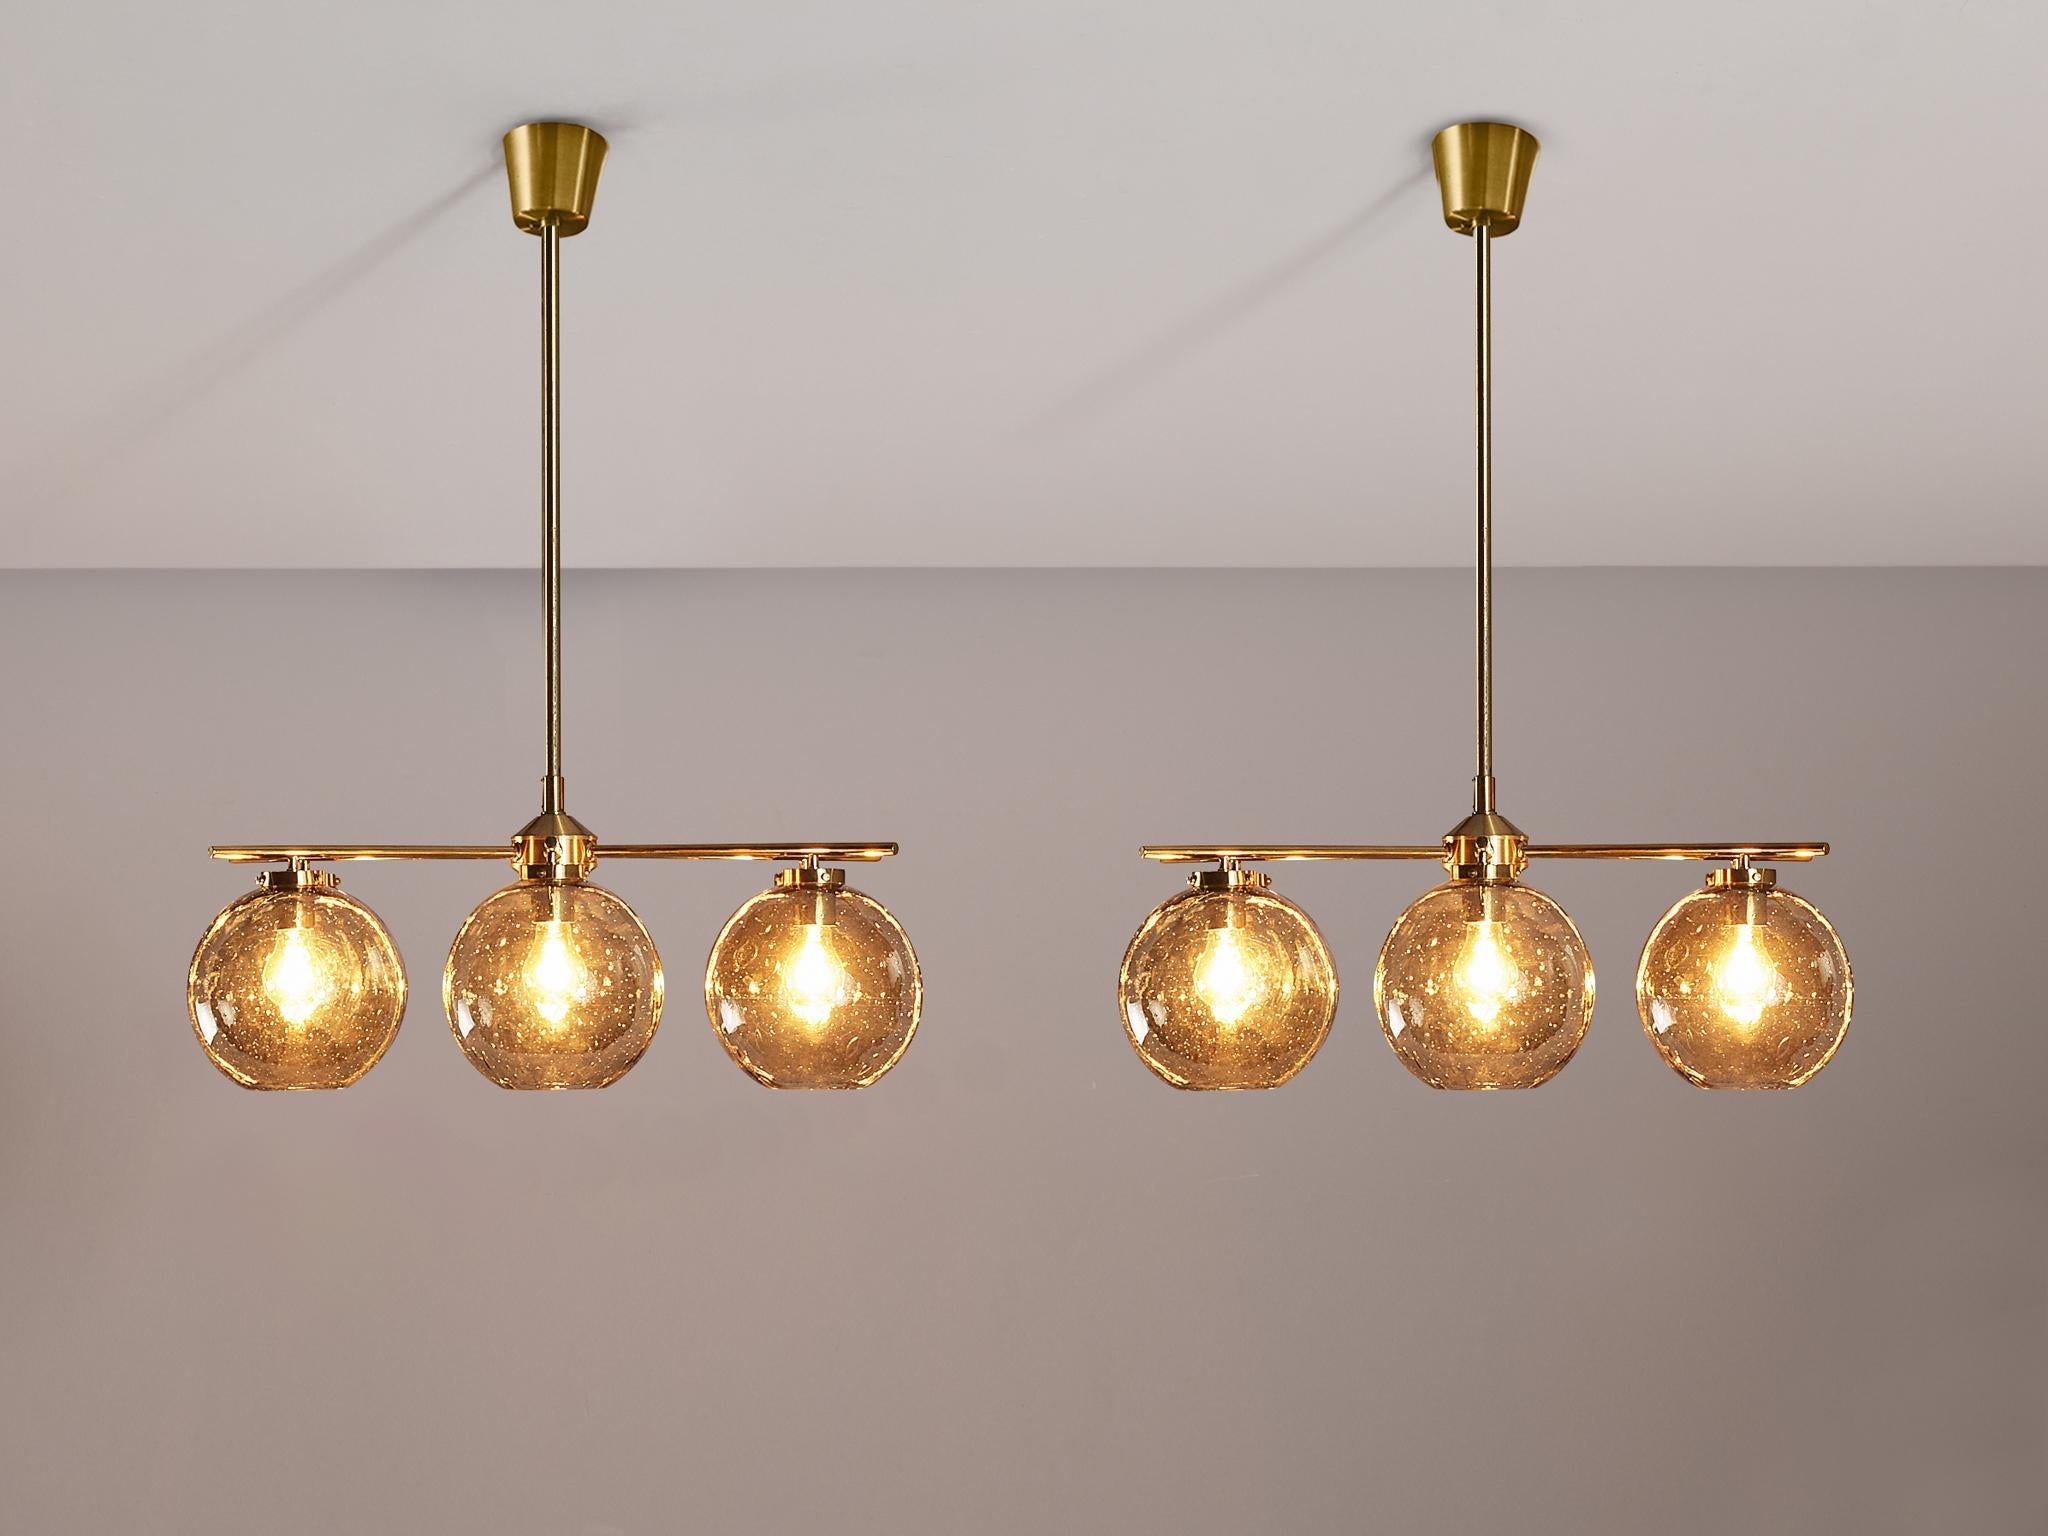 Holger Johansson for Westal Chandeliers in Brass and Smoked Glass